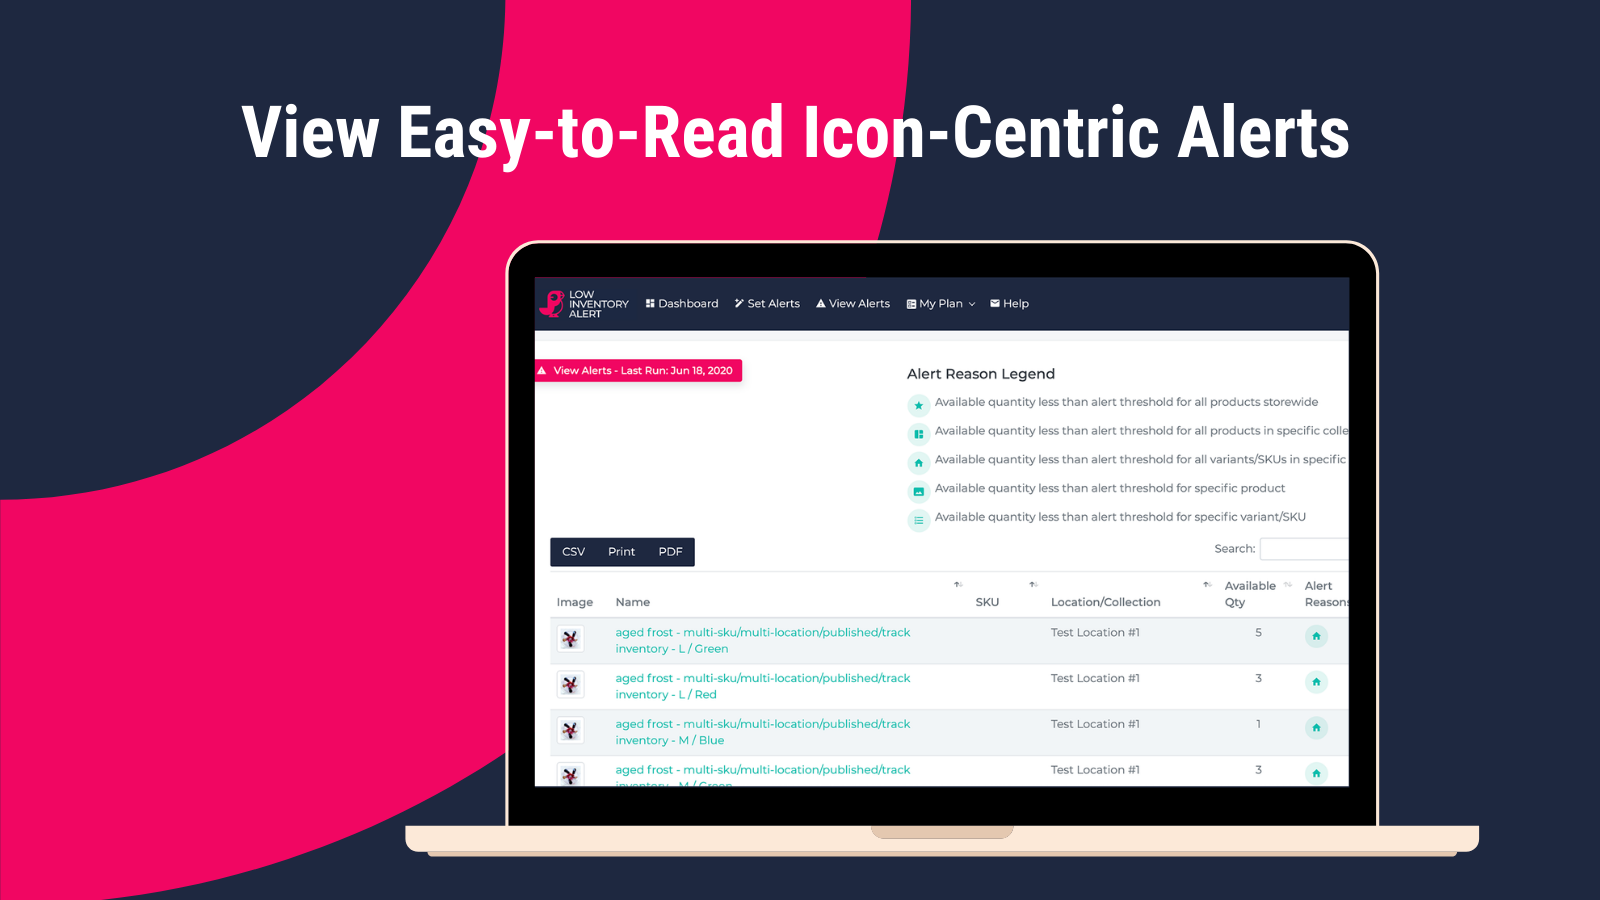 View Easy-to-Read Icon-Centric Alerts